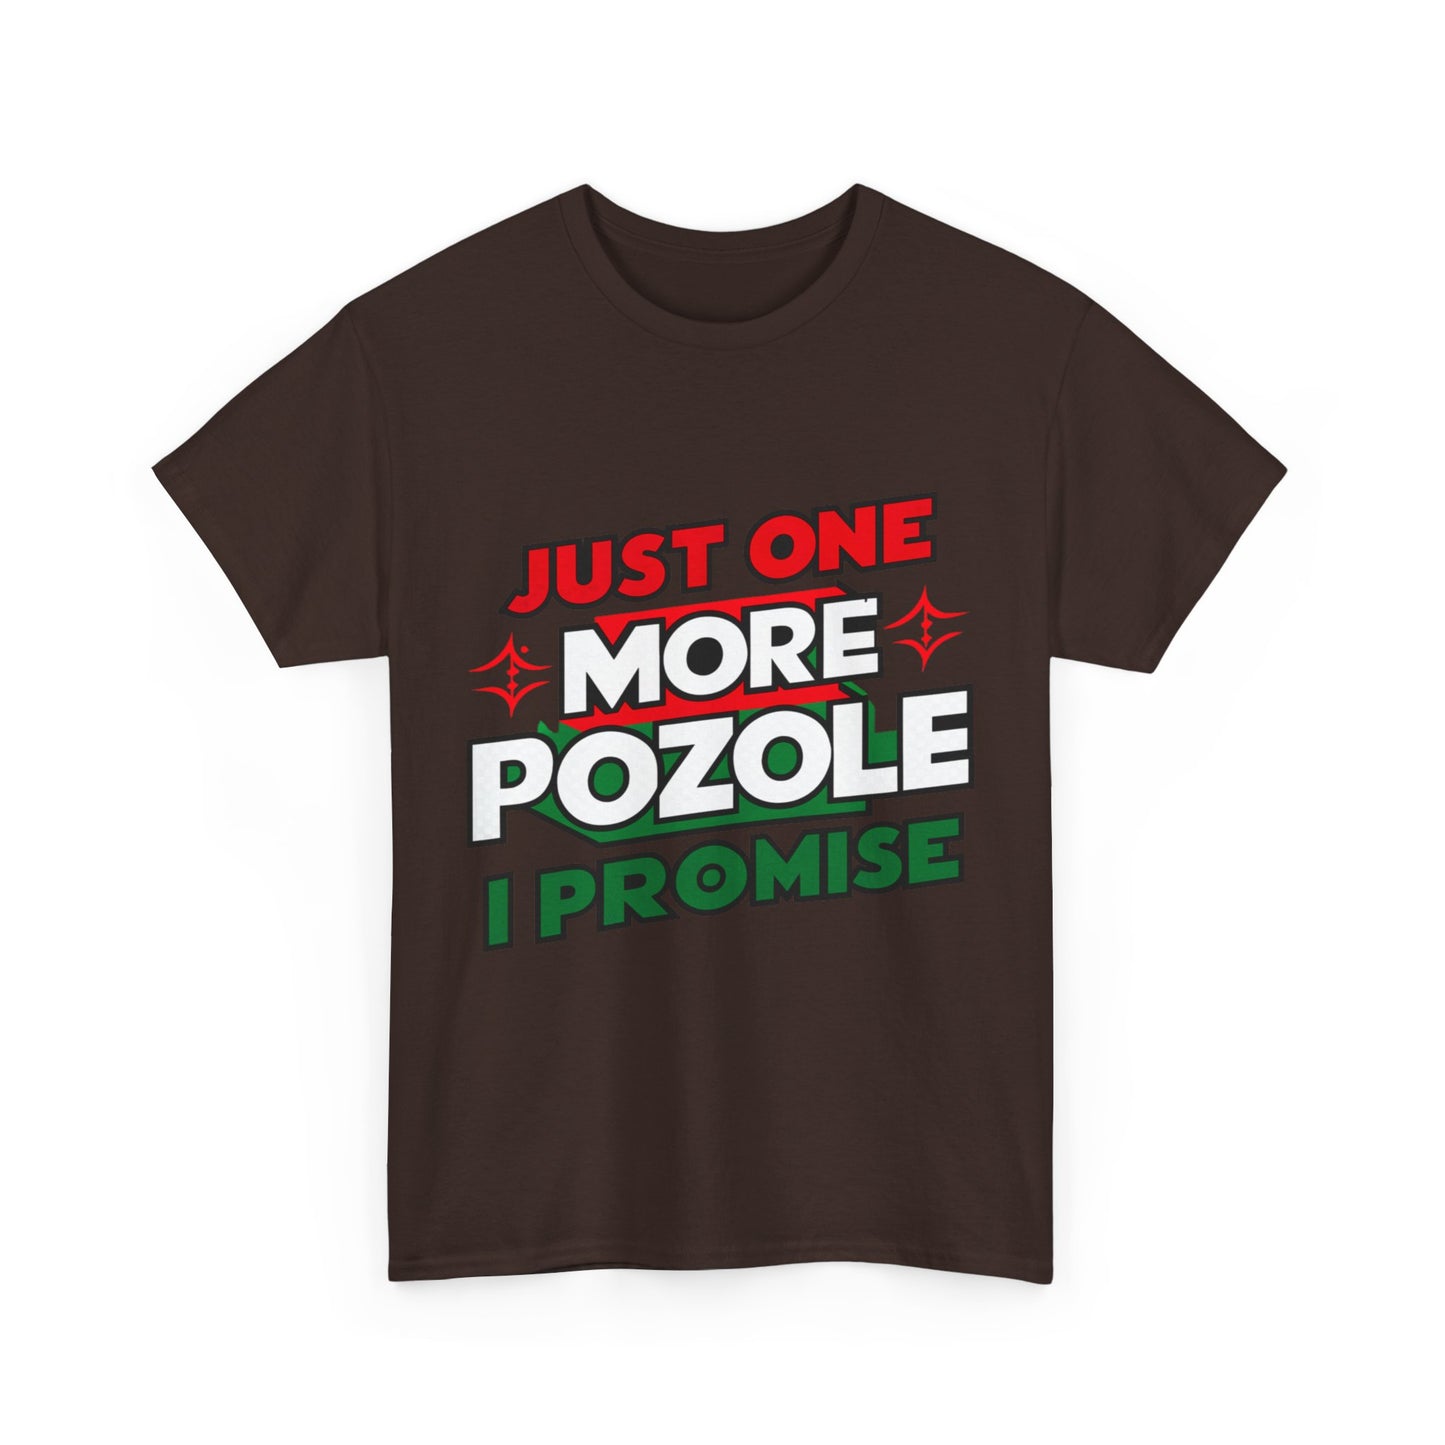 Just One More Pozole I Promise Mexican Food Graphic Unisex Heavy Cotton Tee Cotton Funny Humorous Graphic Soft Premium Unisex Men Women Dark Chocolate T-shirt Birthday Gift-21